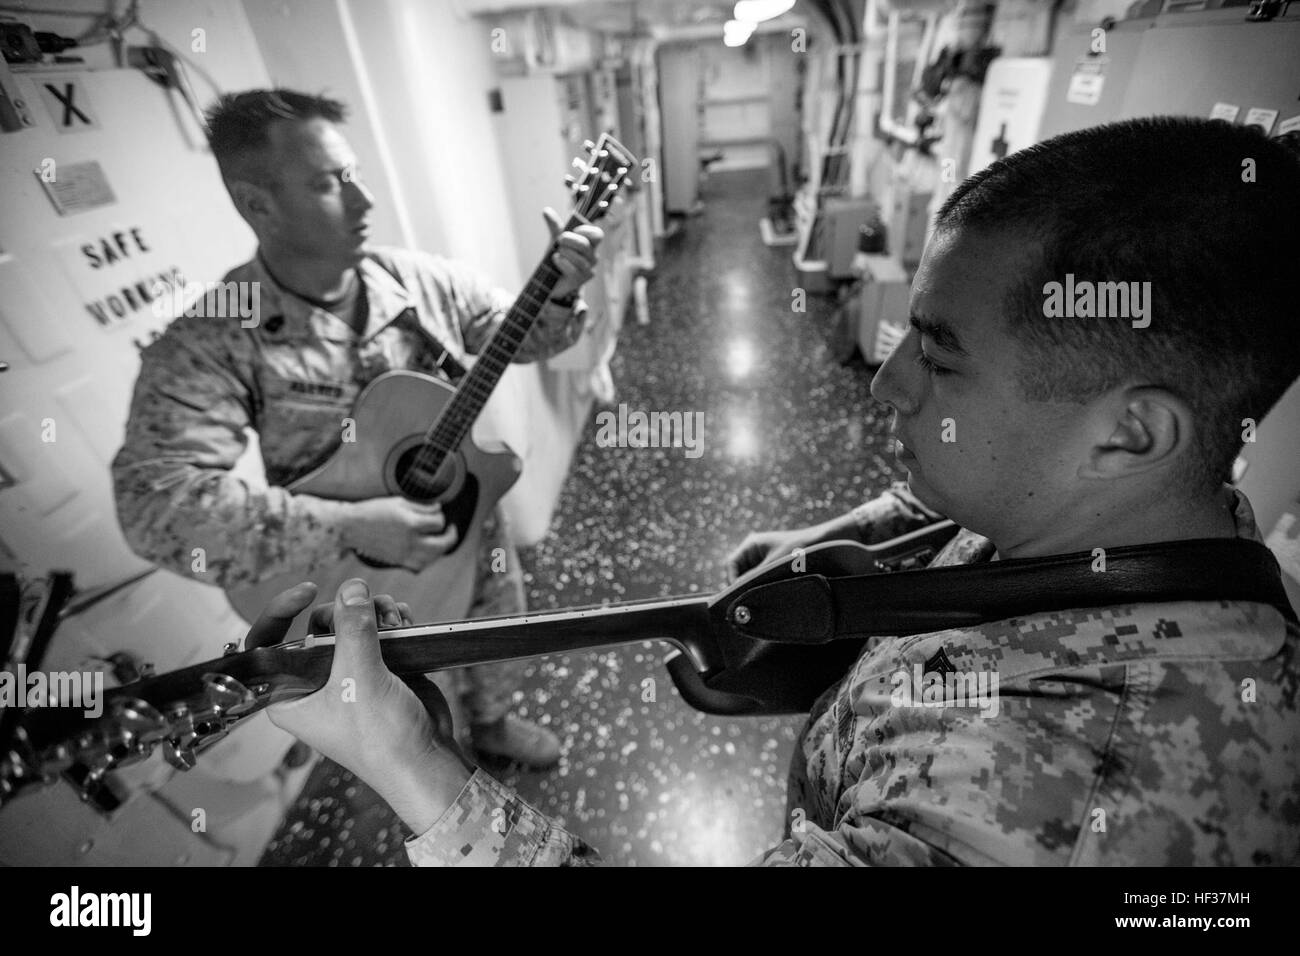 Sergeant Nicolas Rublein, right, a cyber network operator with Battalion Landing Team 3rd Battalion, 6th Marine Regiment, 24th Marine Expeditionary Unit, and 1stSgt. Allen Allred, Company 1stSgt, Light Armored Reconnaissance, BLT 3/6, 24th MEU, play music in a passageway aboard the amphibious transport dock ship USS New York (LPD 21), April 21, 2015. The 24th MEU is currently embarked on the ships of the Iwo Jima Amphibious Ready Group and deployed to maintain regional security in the U.S. 5th Fleet Area of operations. (U.S. Marine Corps photo by Cpl. Todd F. Michalek/Released) An unlikely Mar Stock Photo